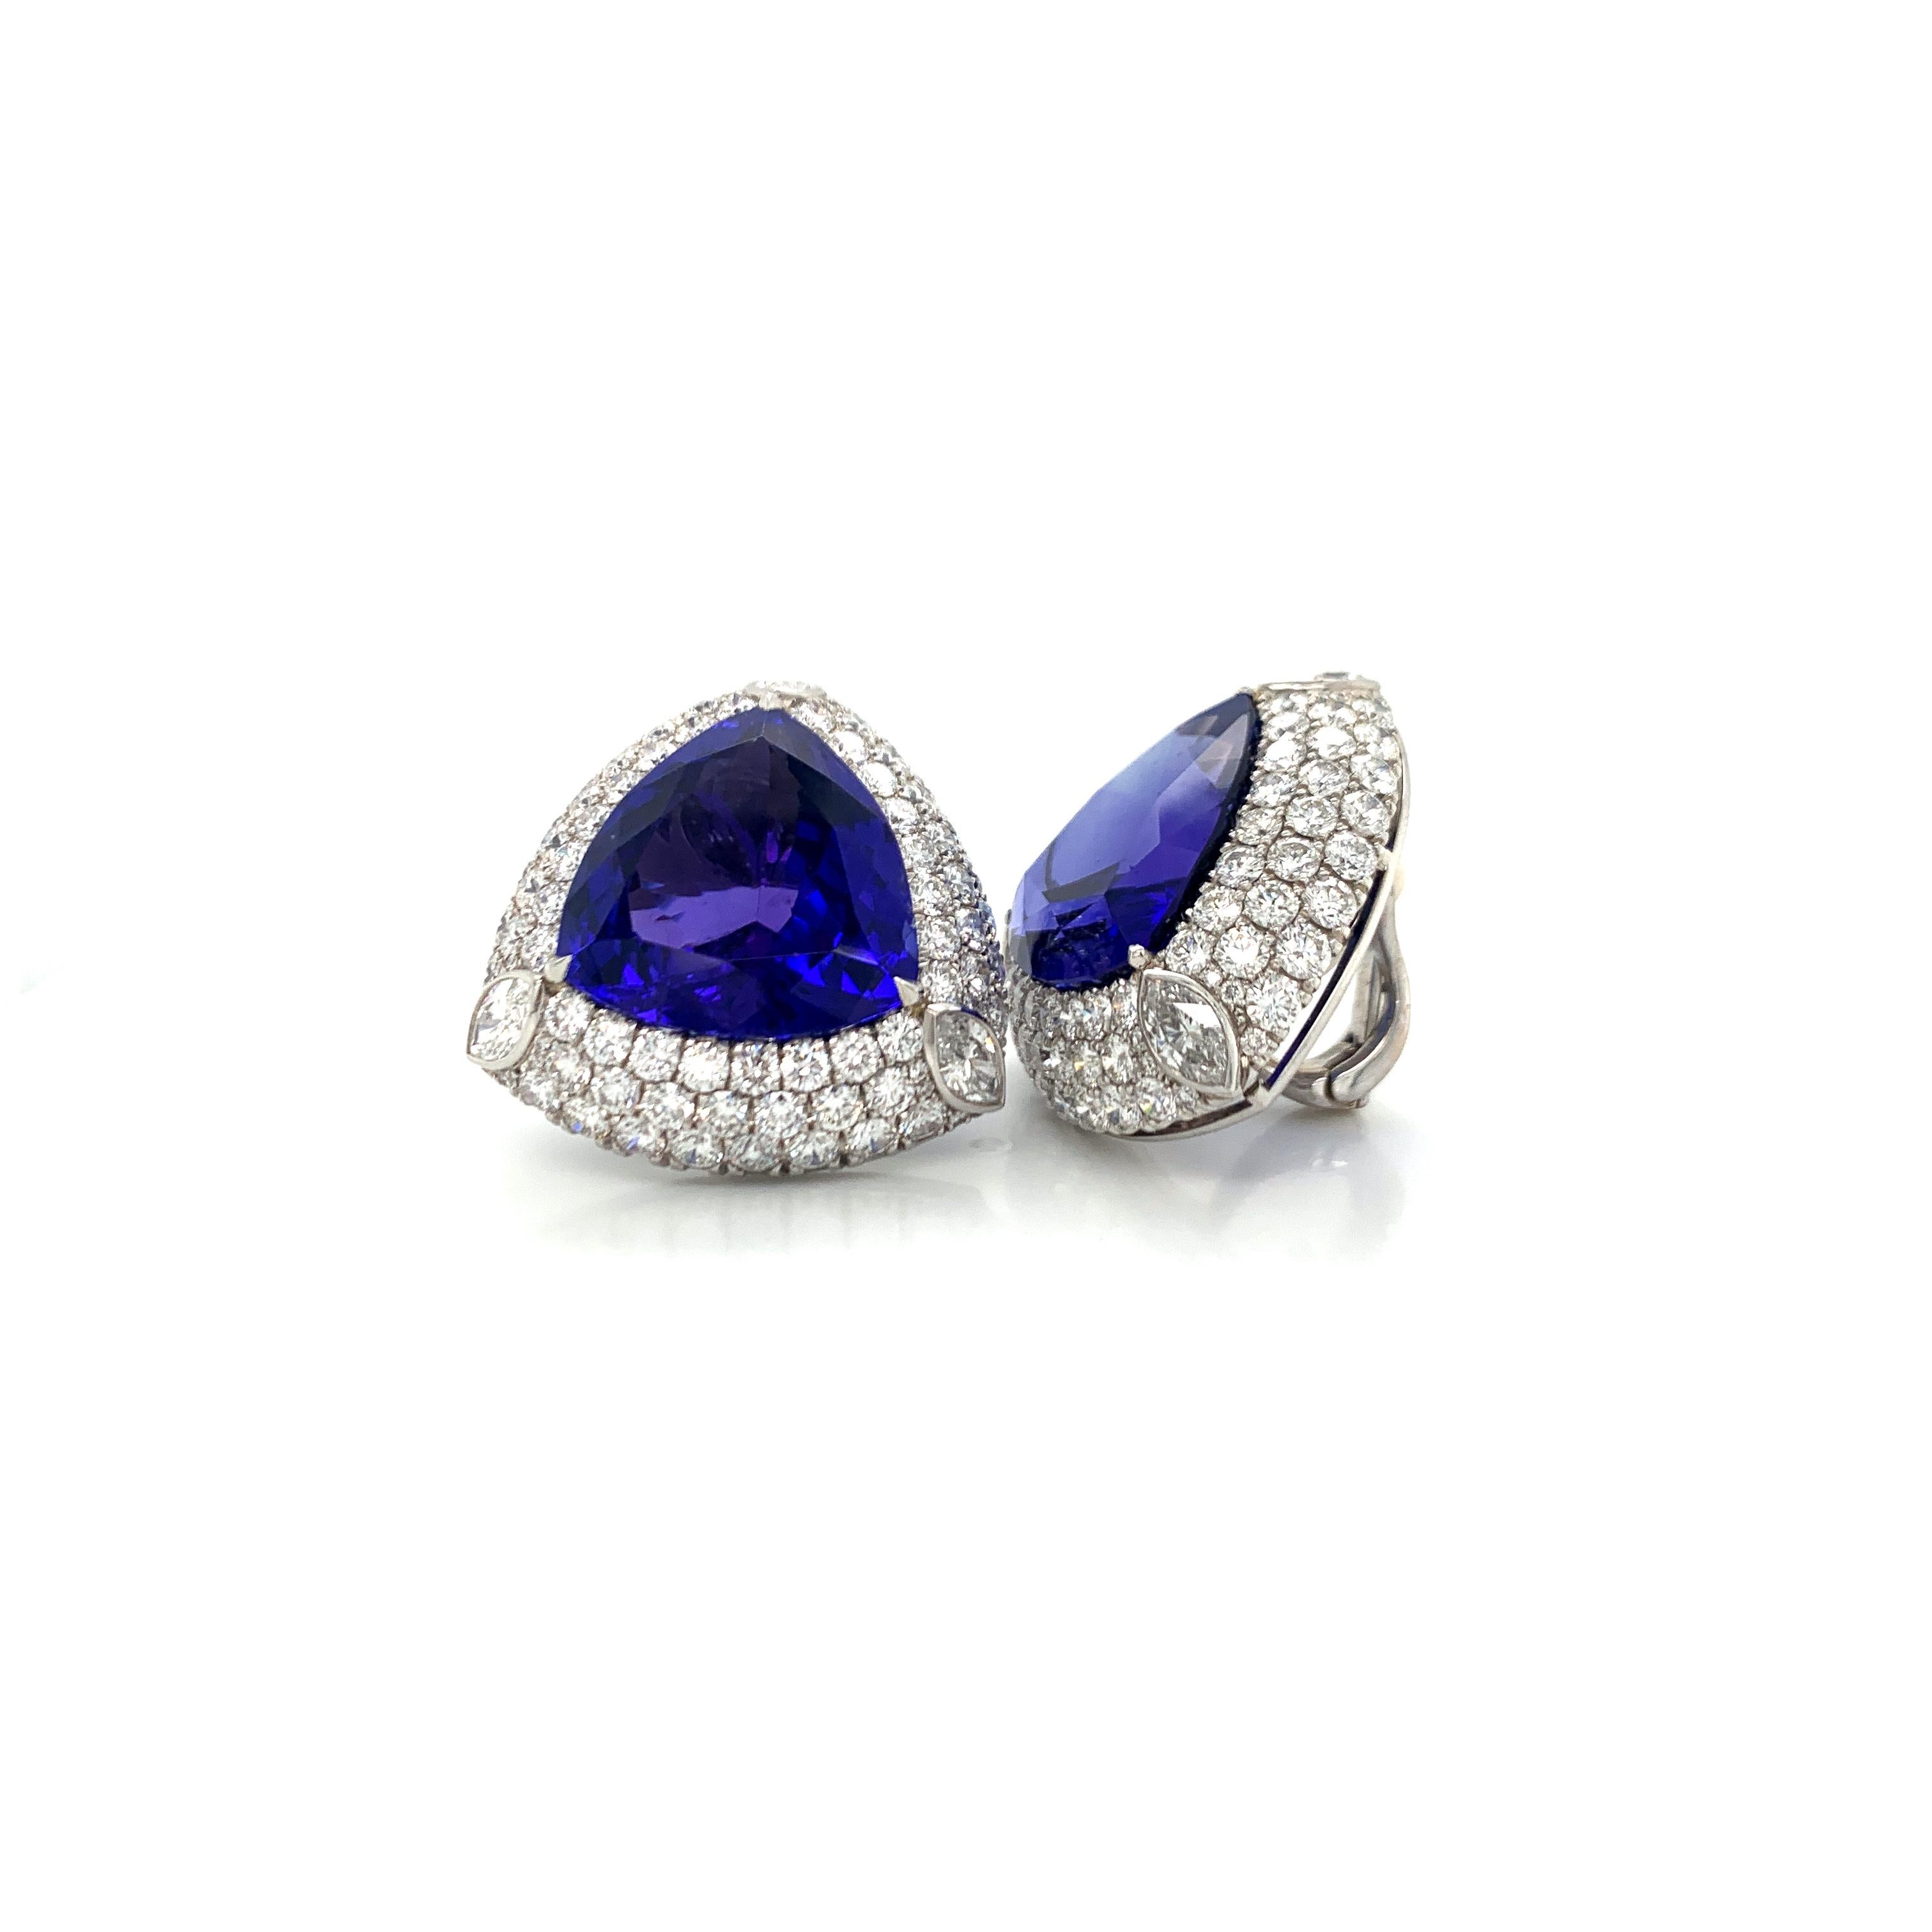 The custom cut, deep blue tanzanites are elegantly framed with round and marquise diamonds.  The design is a powerful burst of blue in contrast to the bright white diamonds.  The earrings are well proportioned to sit perfectly, and comfortably, on